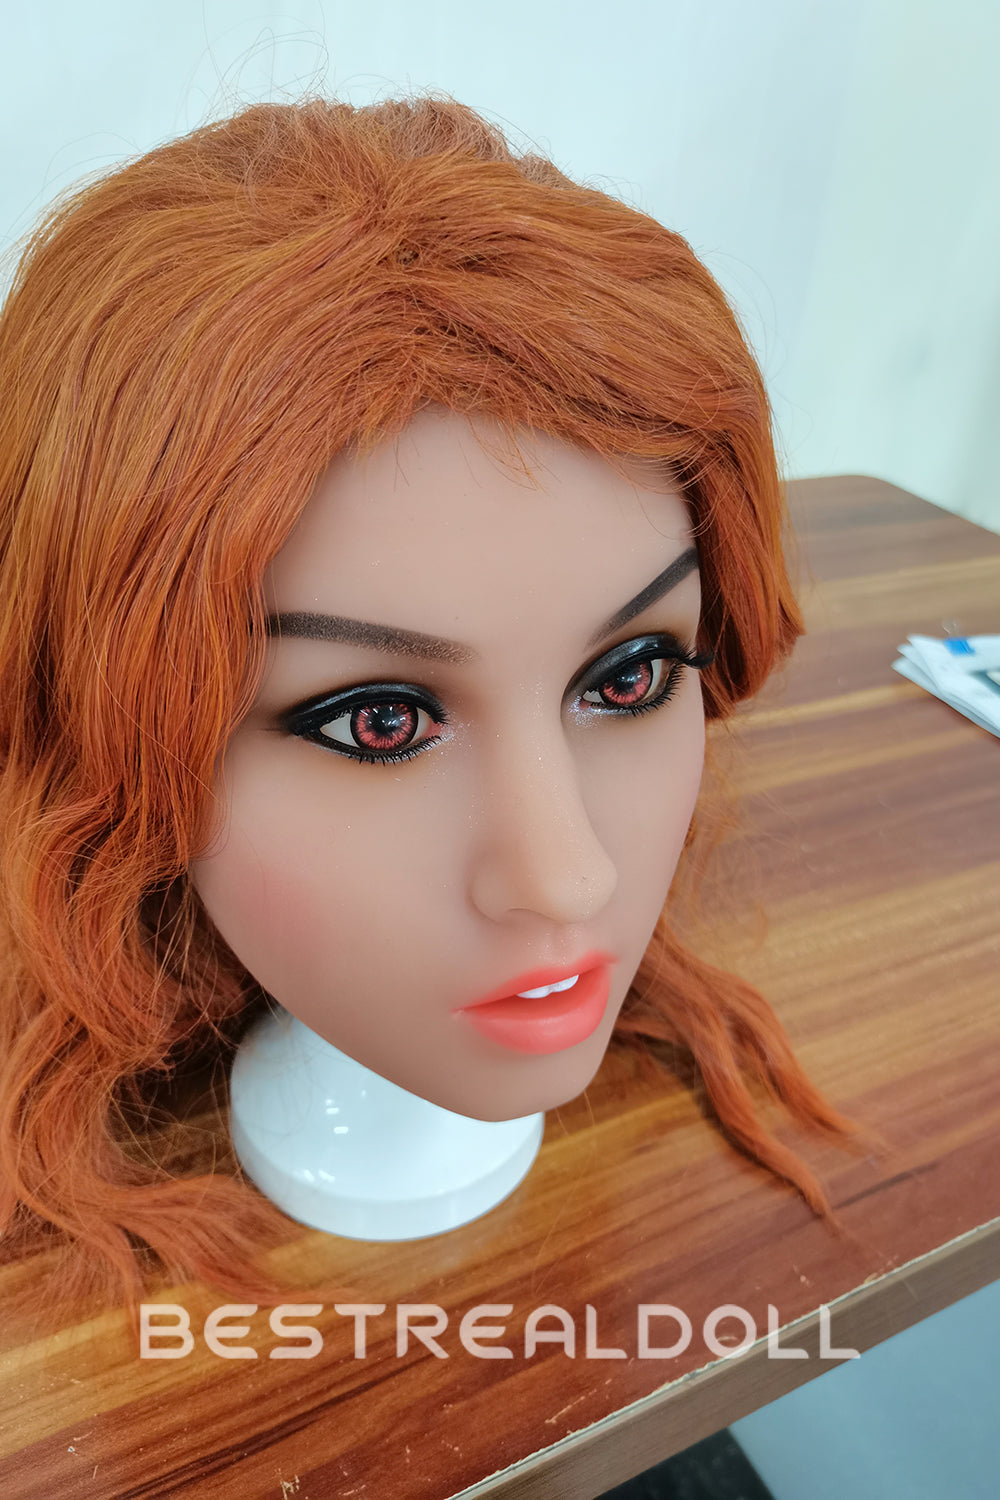 US Stock - 157cm Edeny TPE Transgender Sex Doll Realistic Small Breasts Lesbian Doll Orange Hair Shemale Love Doll